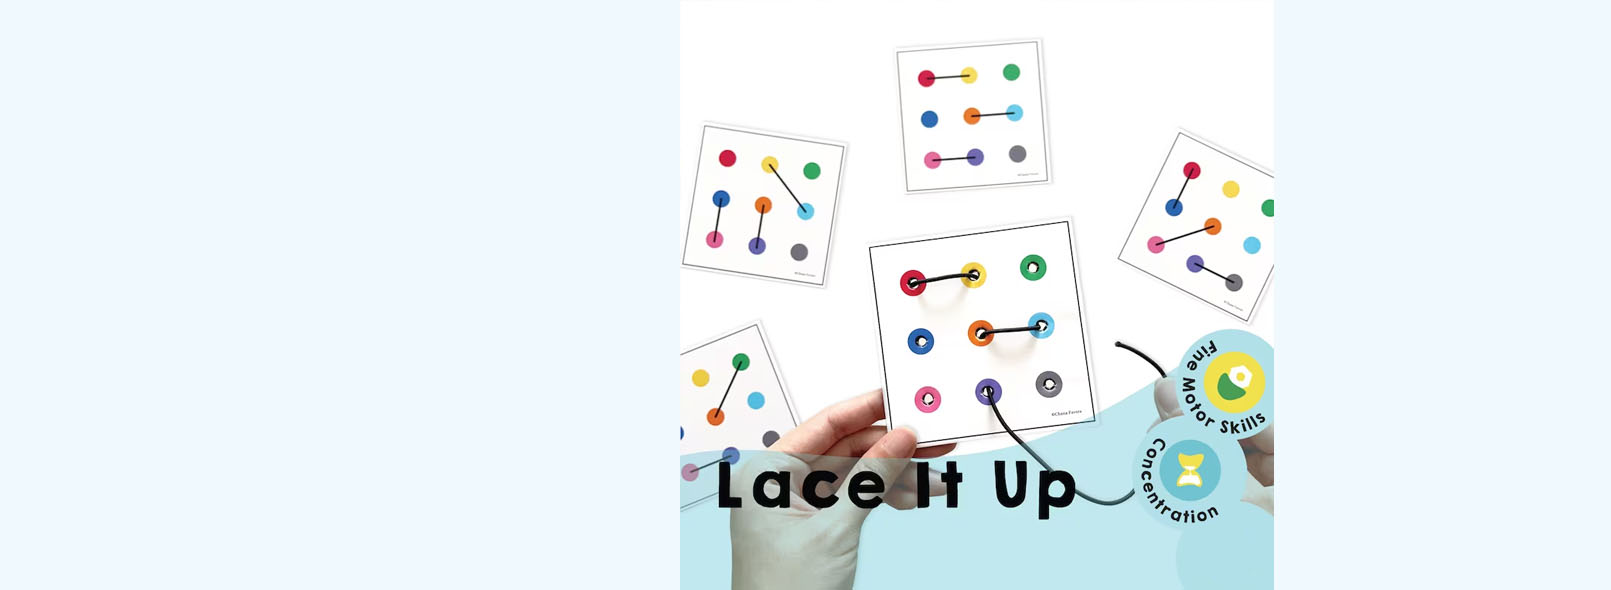 laceitup_banner